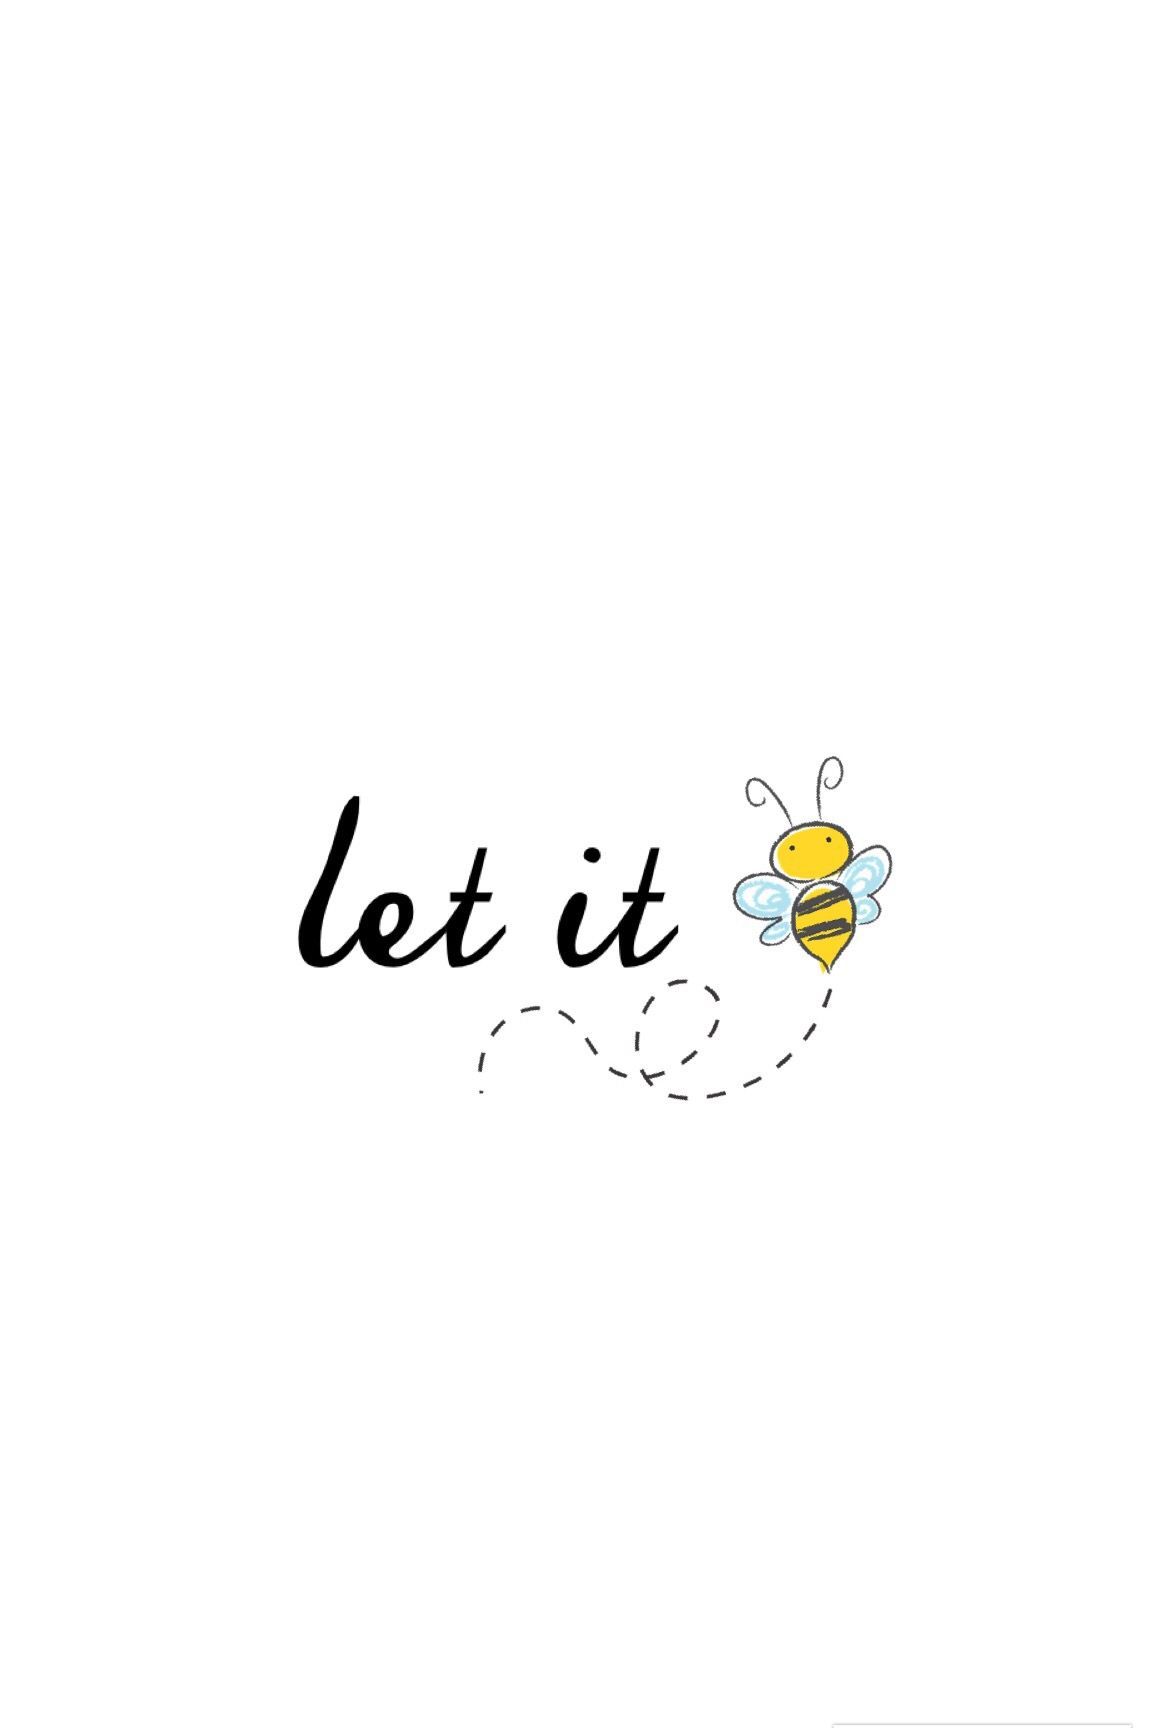 Let It Be Wallpapers